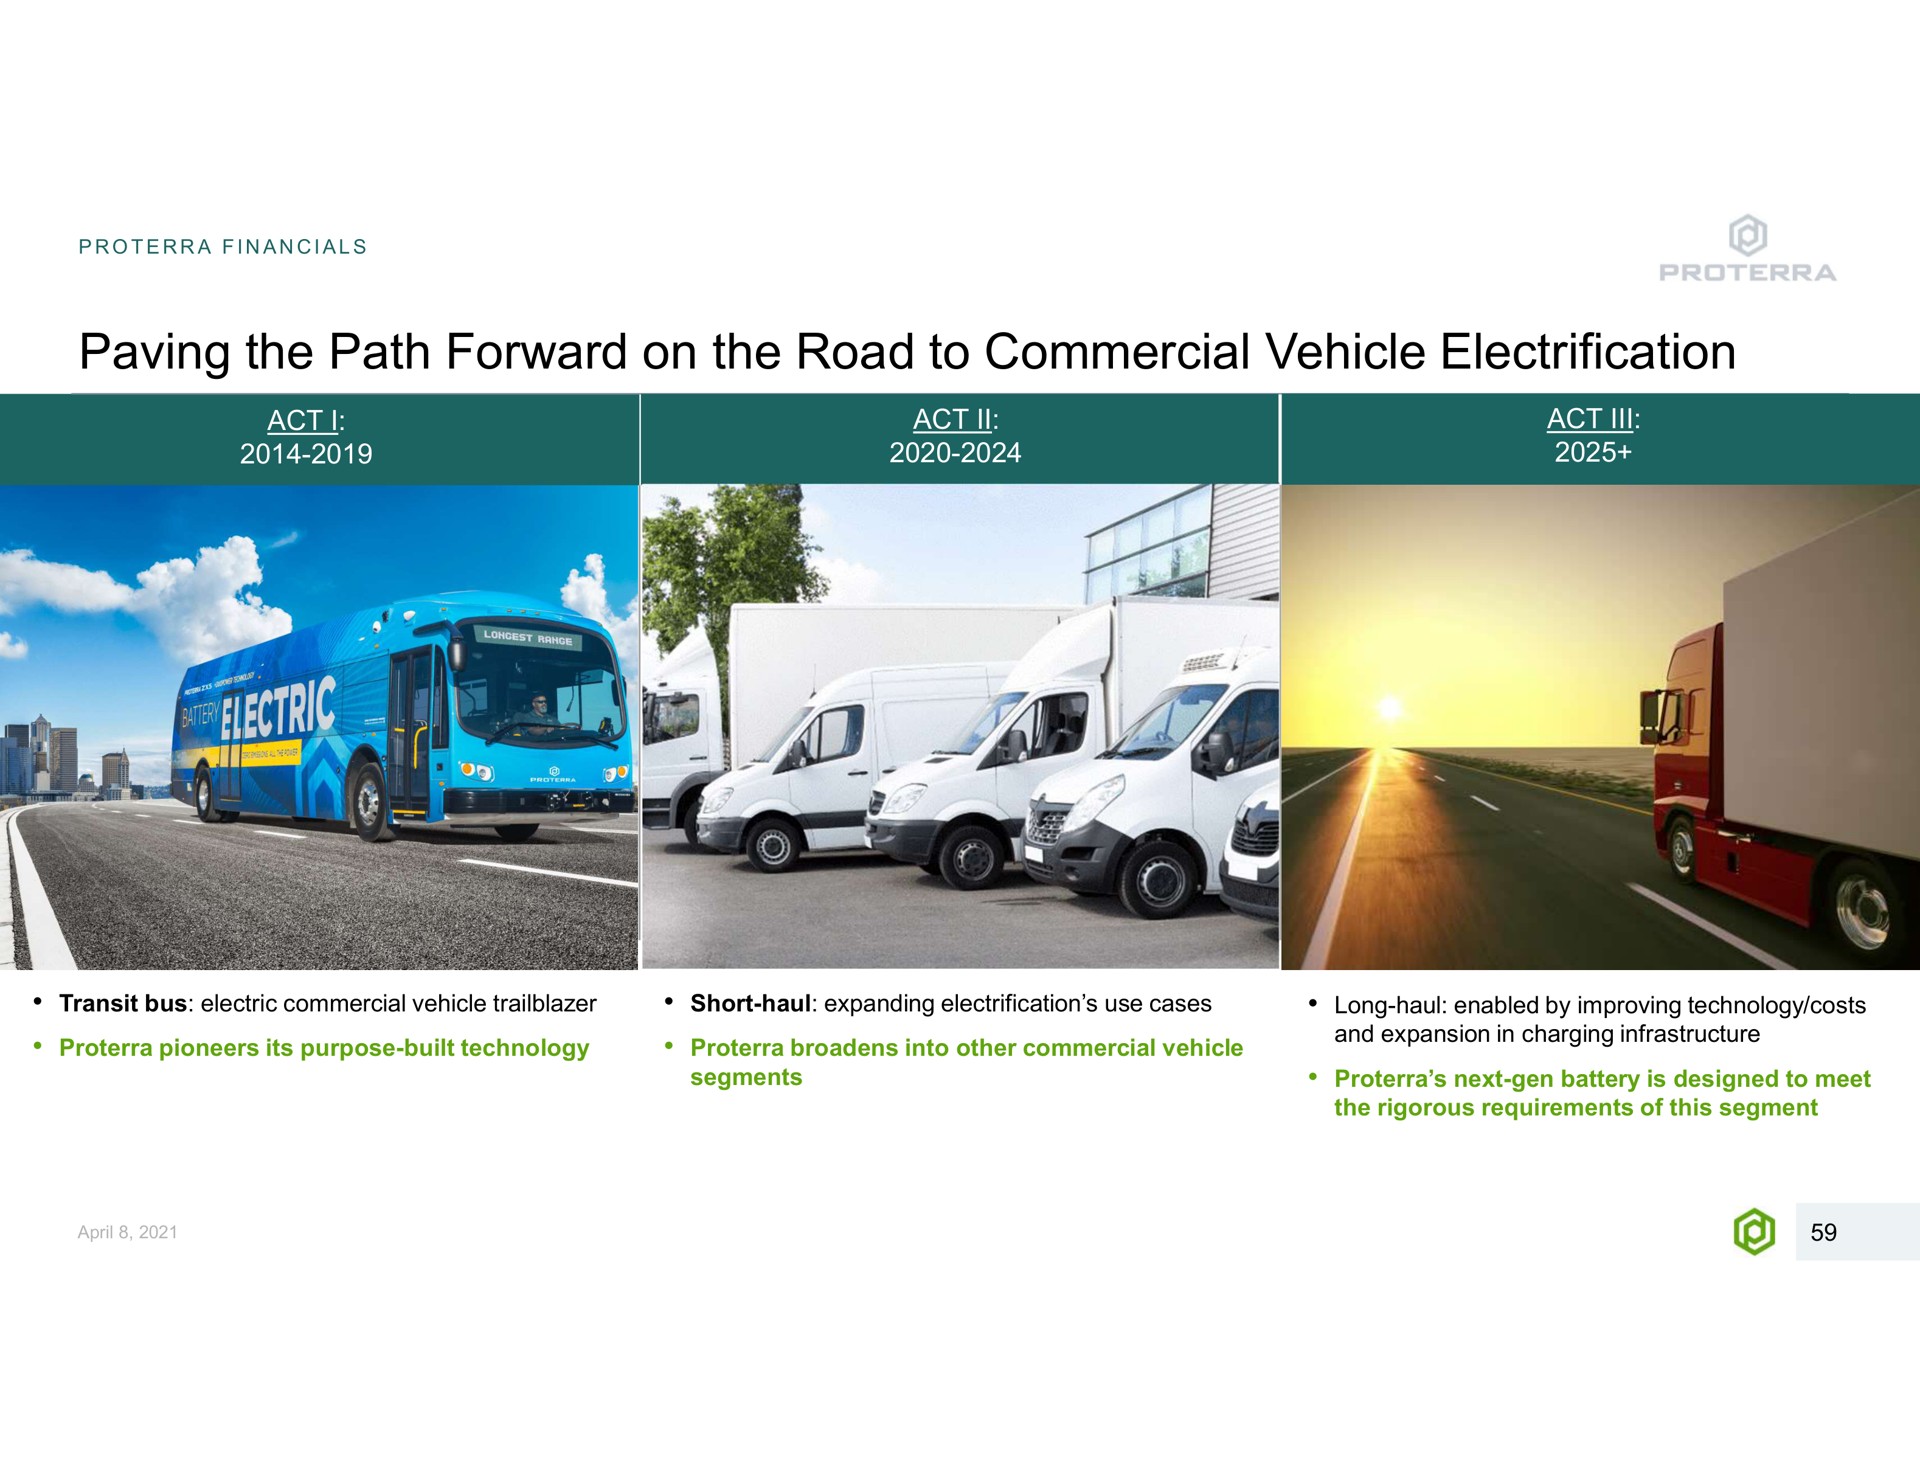 paving the path forward on the road to commercial vehicle electrification act i act act transit bus electric short haul expanding use cases long haul enabled by improving technology costs pioneers its purpose built technology broadens into other segments in changing next gen battery is designed meet rigorous requirements of this segment | Proterra